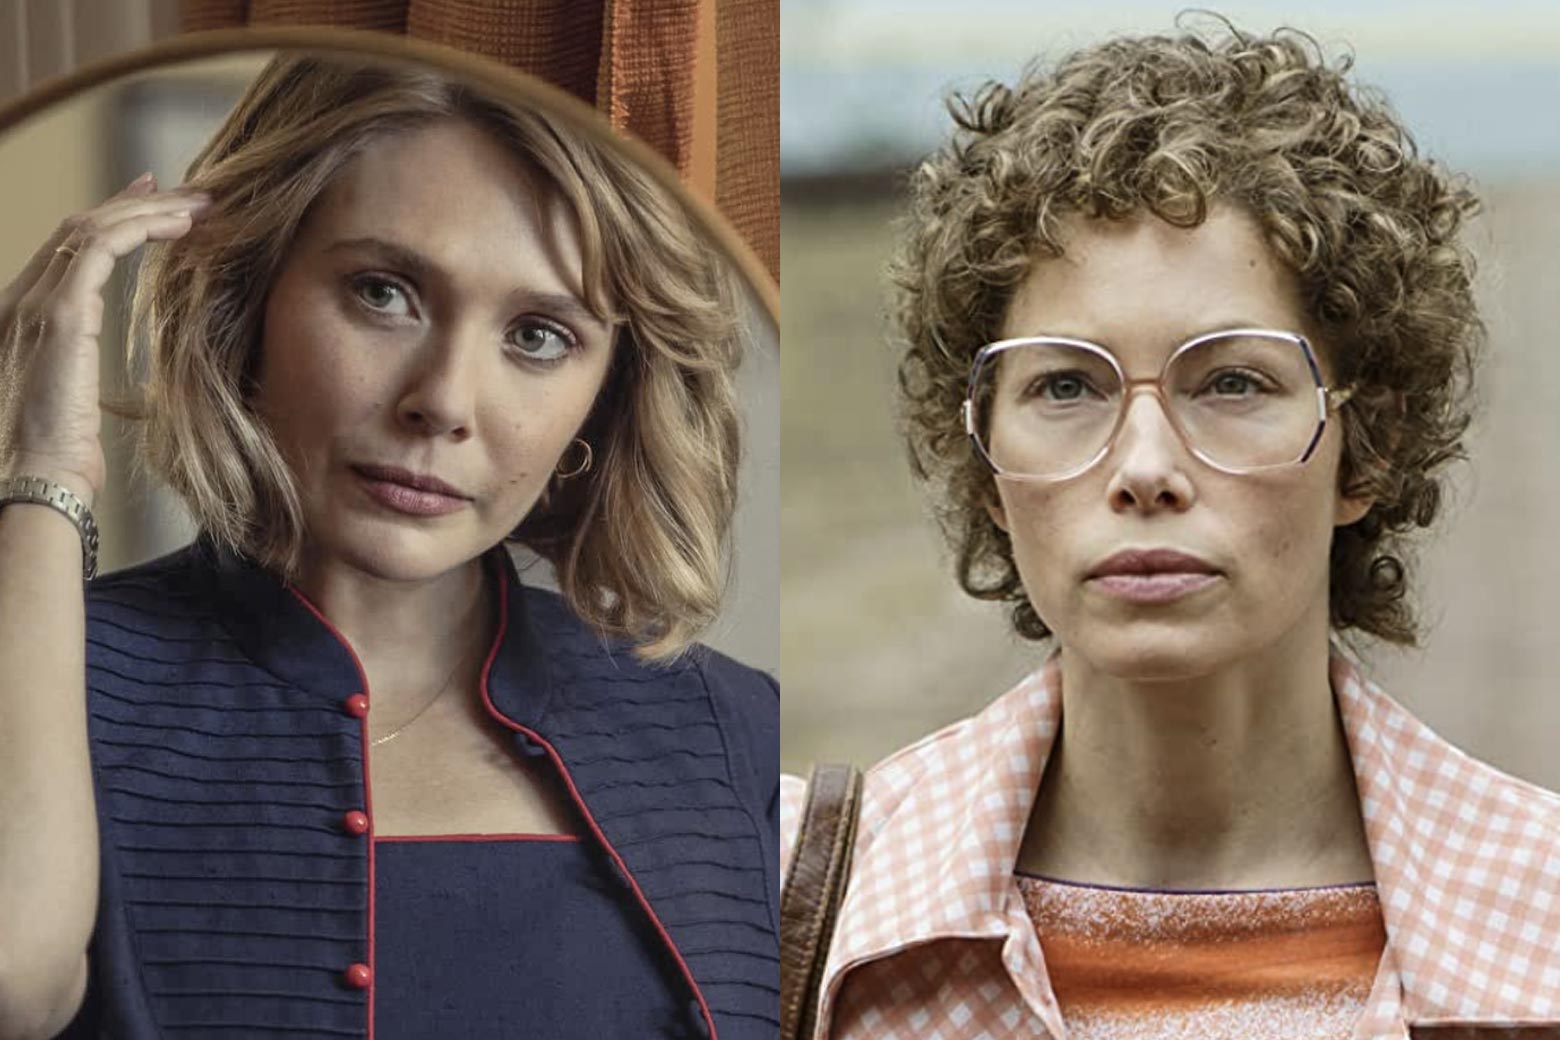 Side-by-side collage of Elizabeth Olsen (L) with a shoulder-length bob and Jessica Biel (R) with a perm and large glasses.